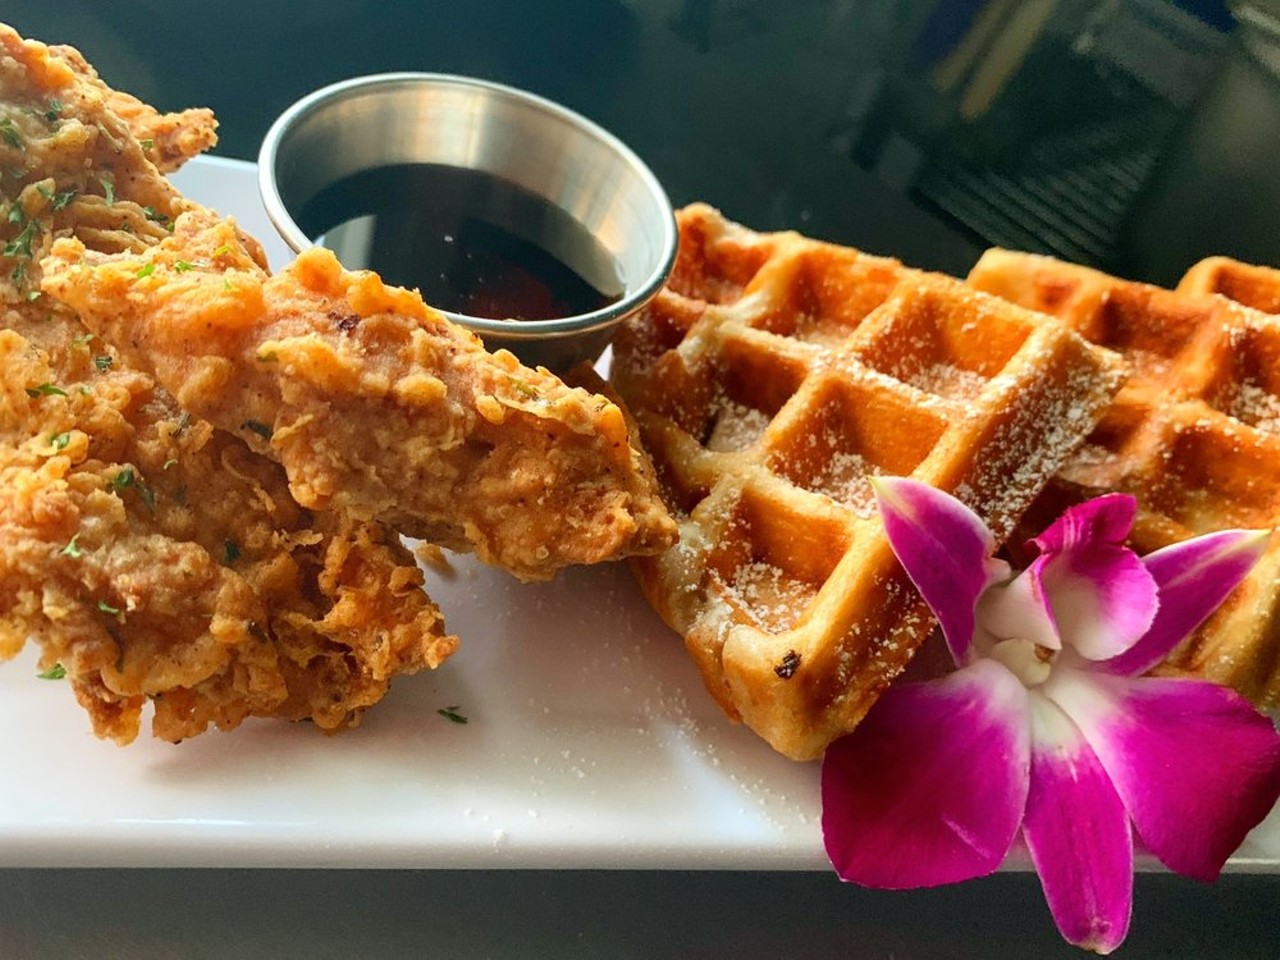 HapPea Vegans offers totally meatless brunch bites... UWB will truly have something for everyone.